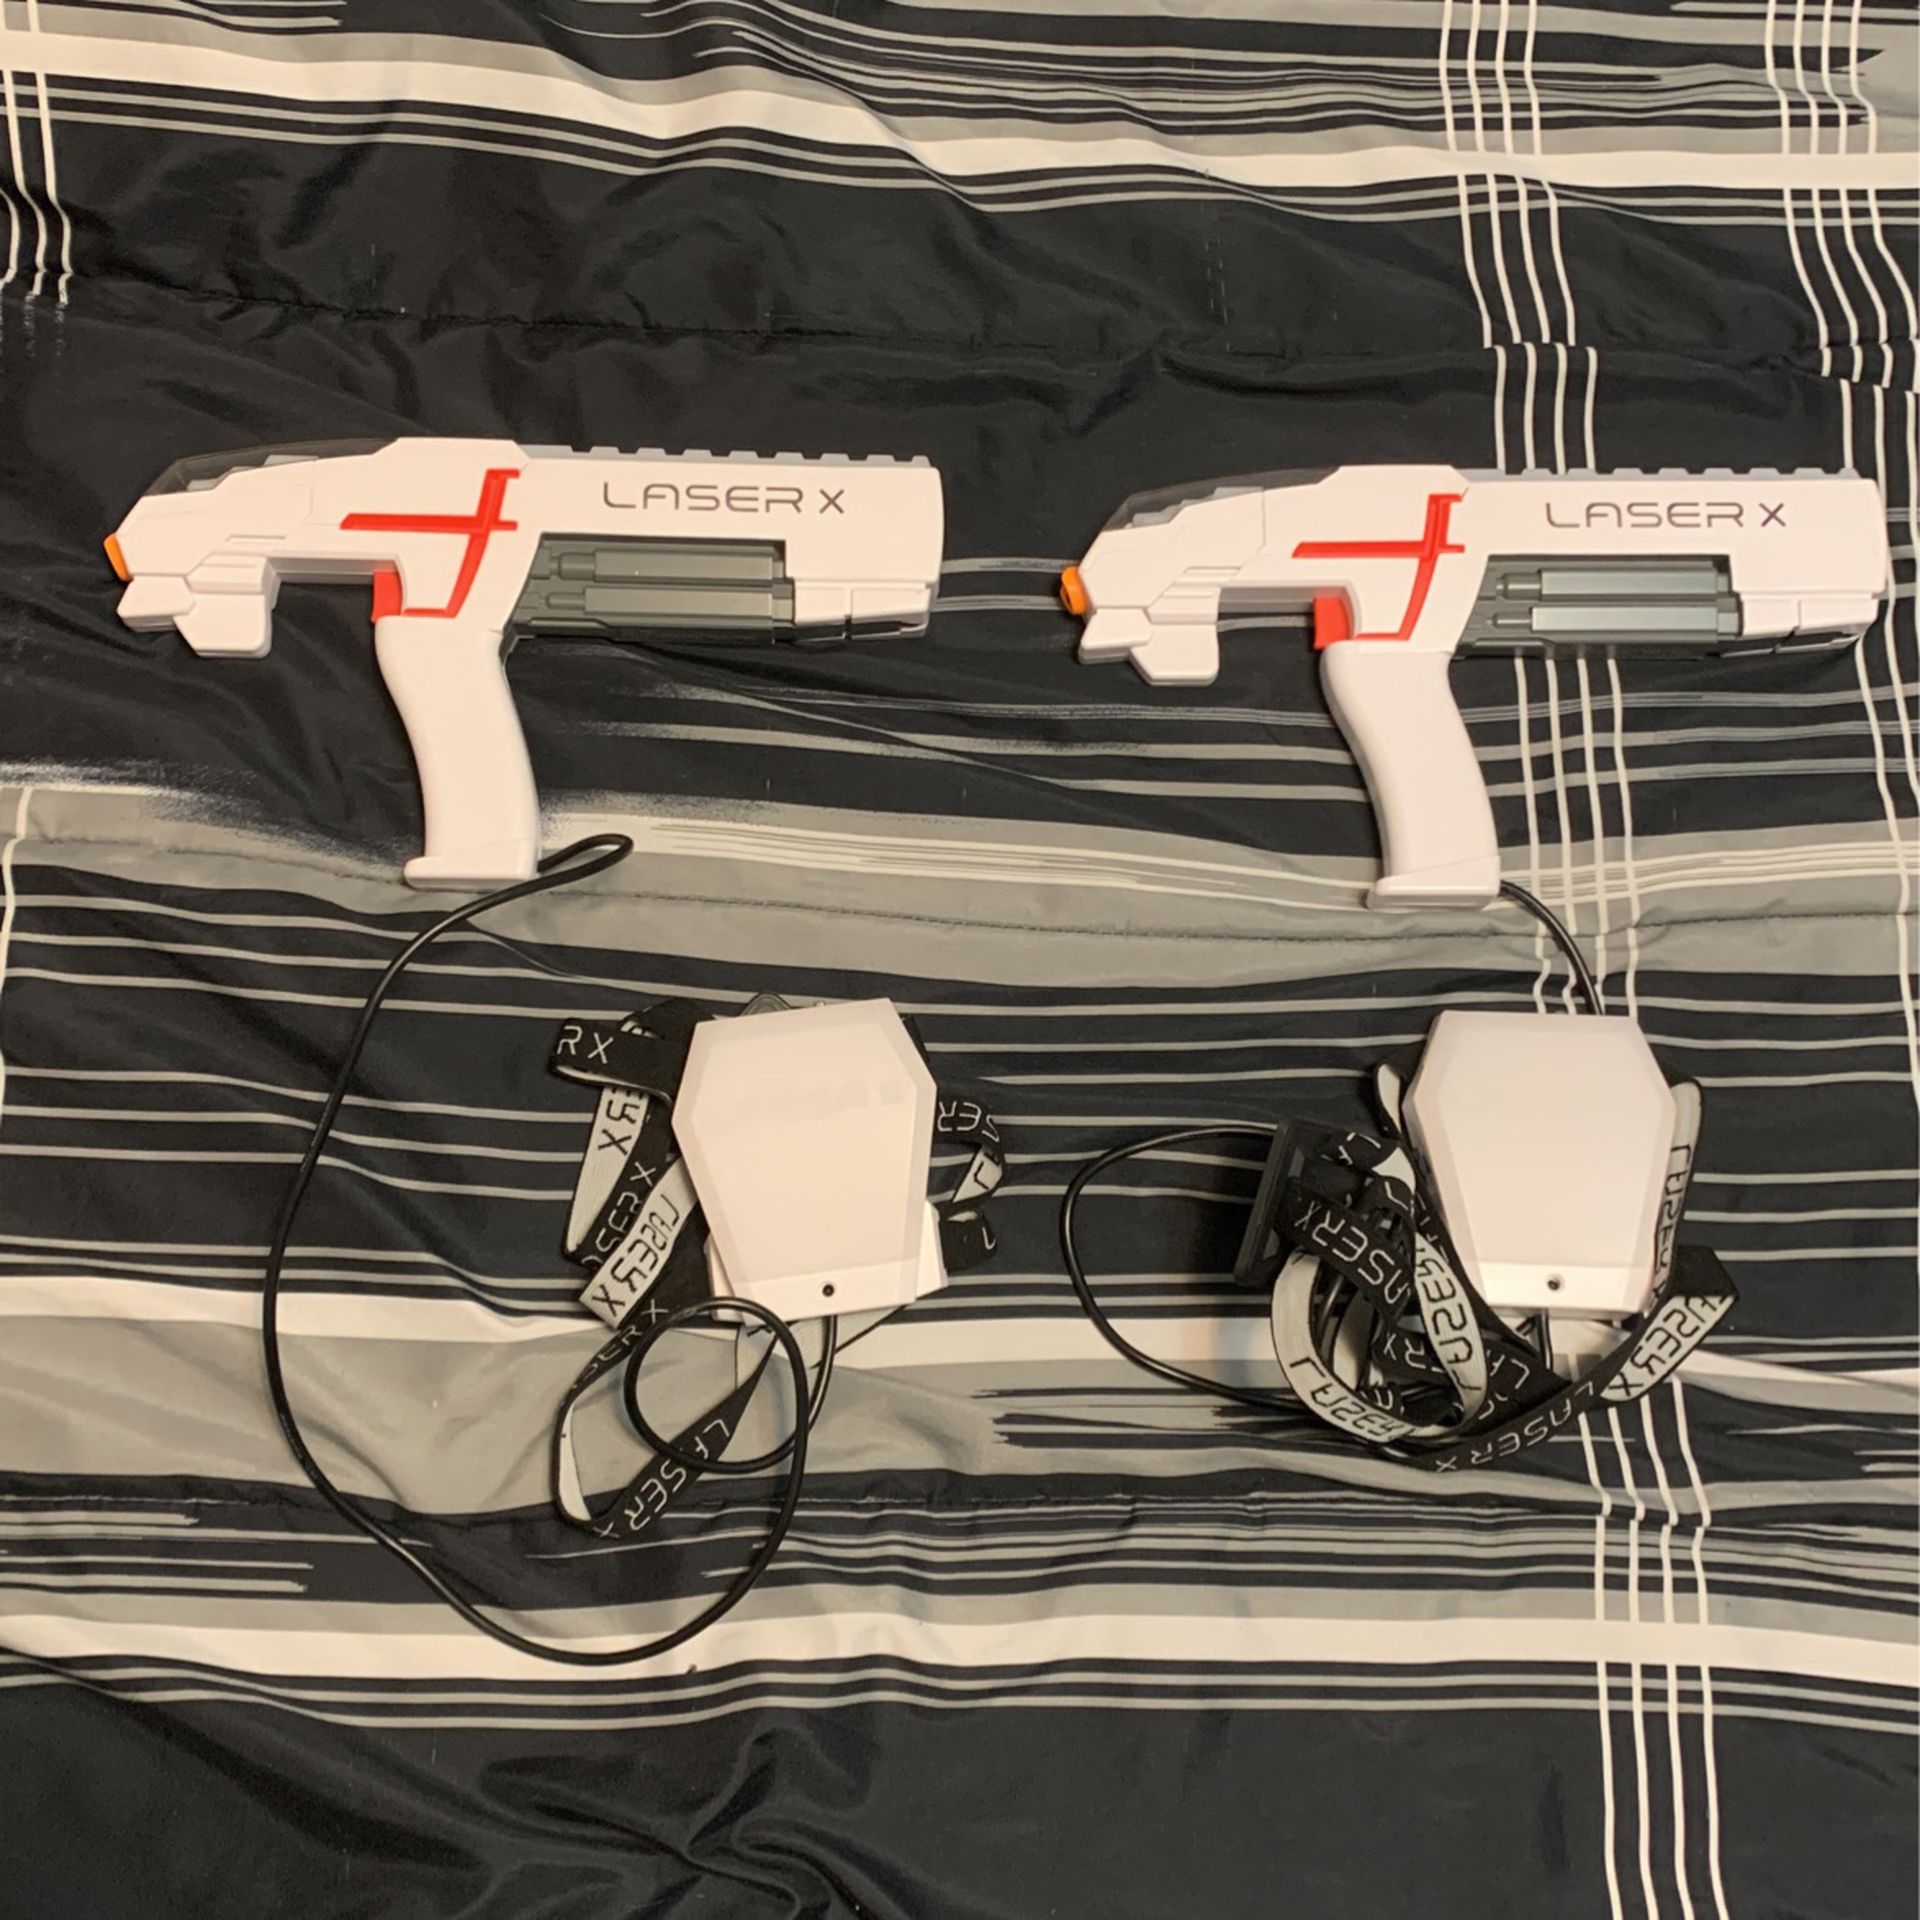 Two Laser X Laser Tag Units